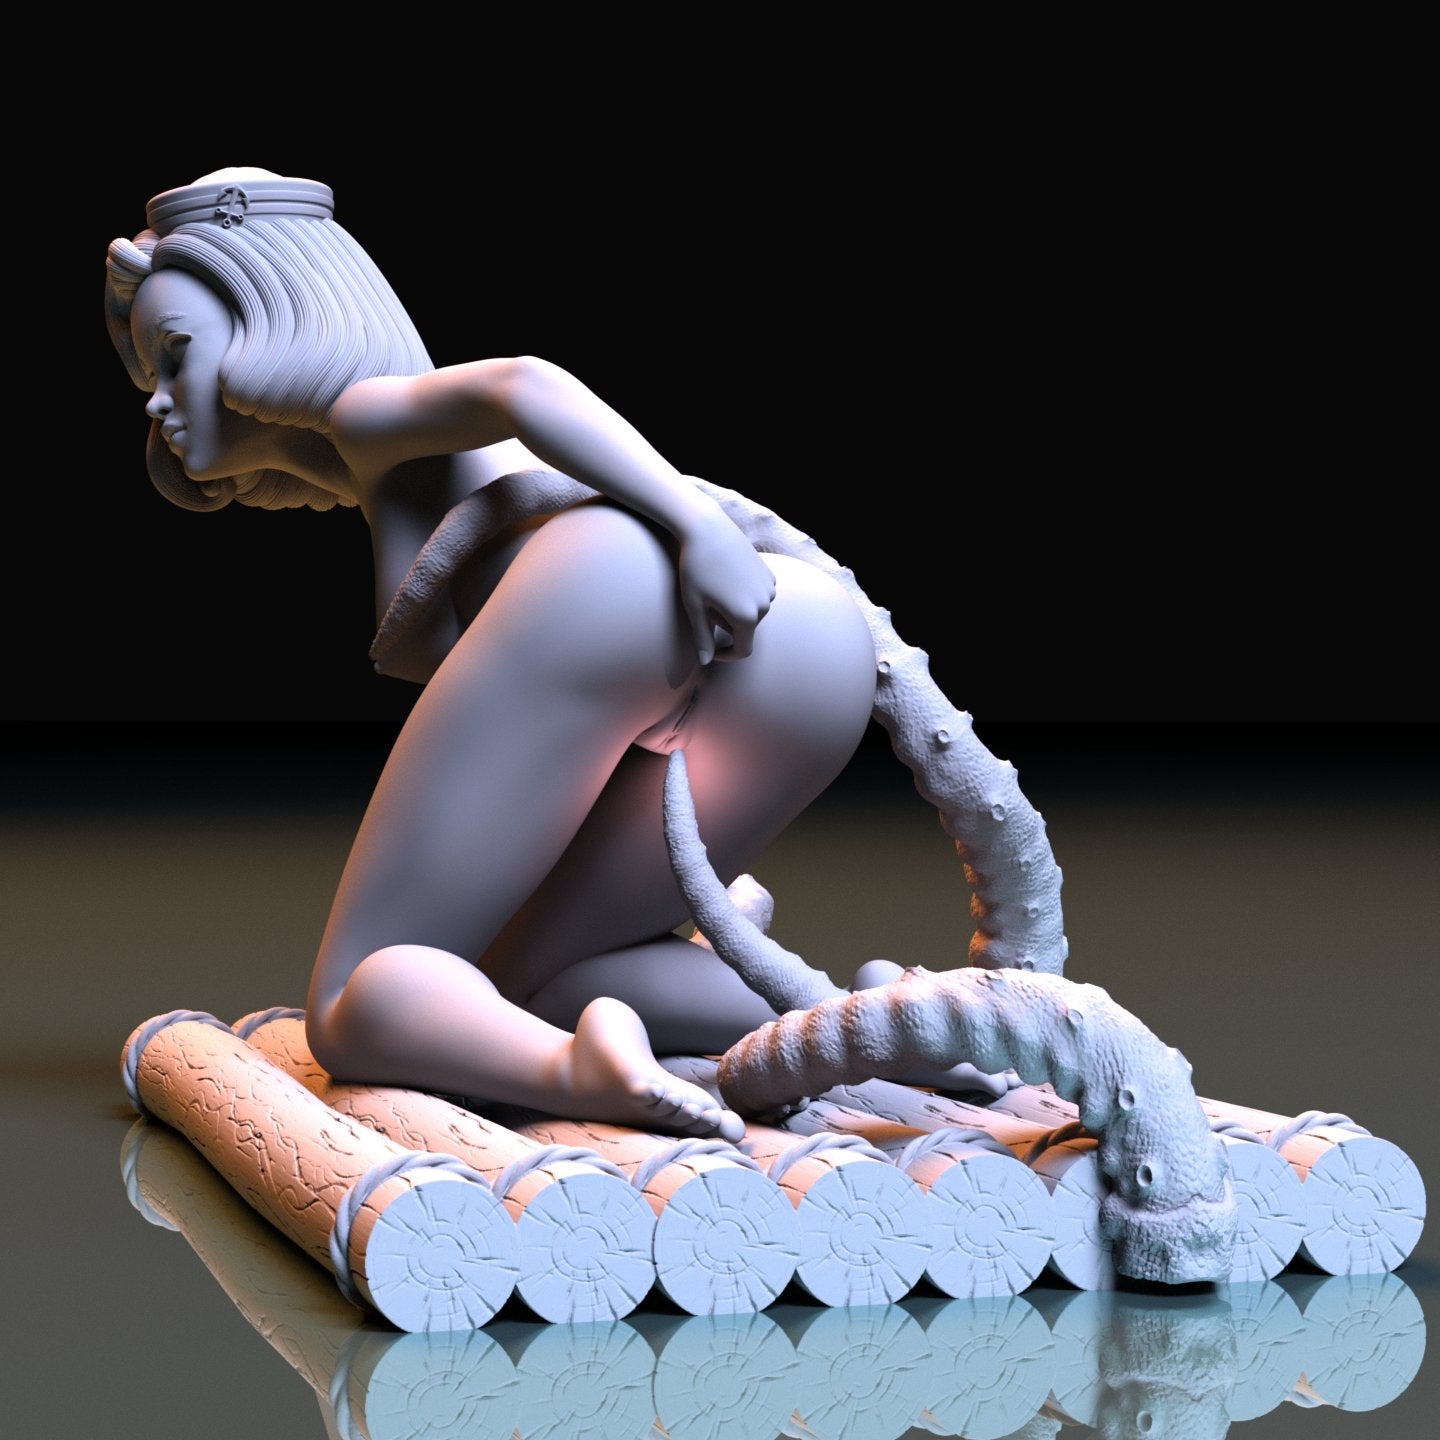 Sailor Girl and tentacles NSFW 3D Printed Figurine Fanart Unpainted Miniature Collectibles